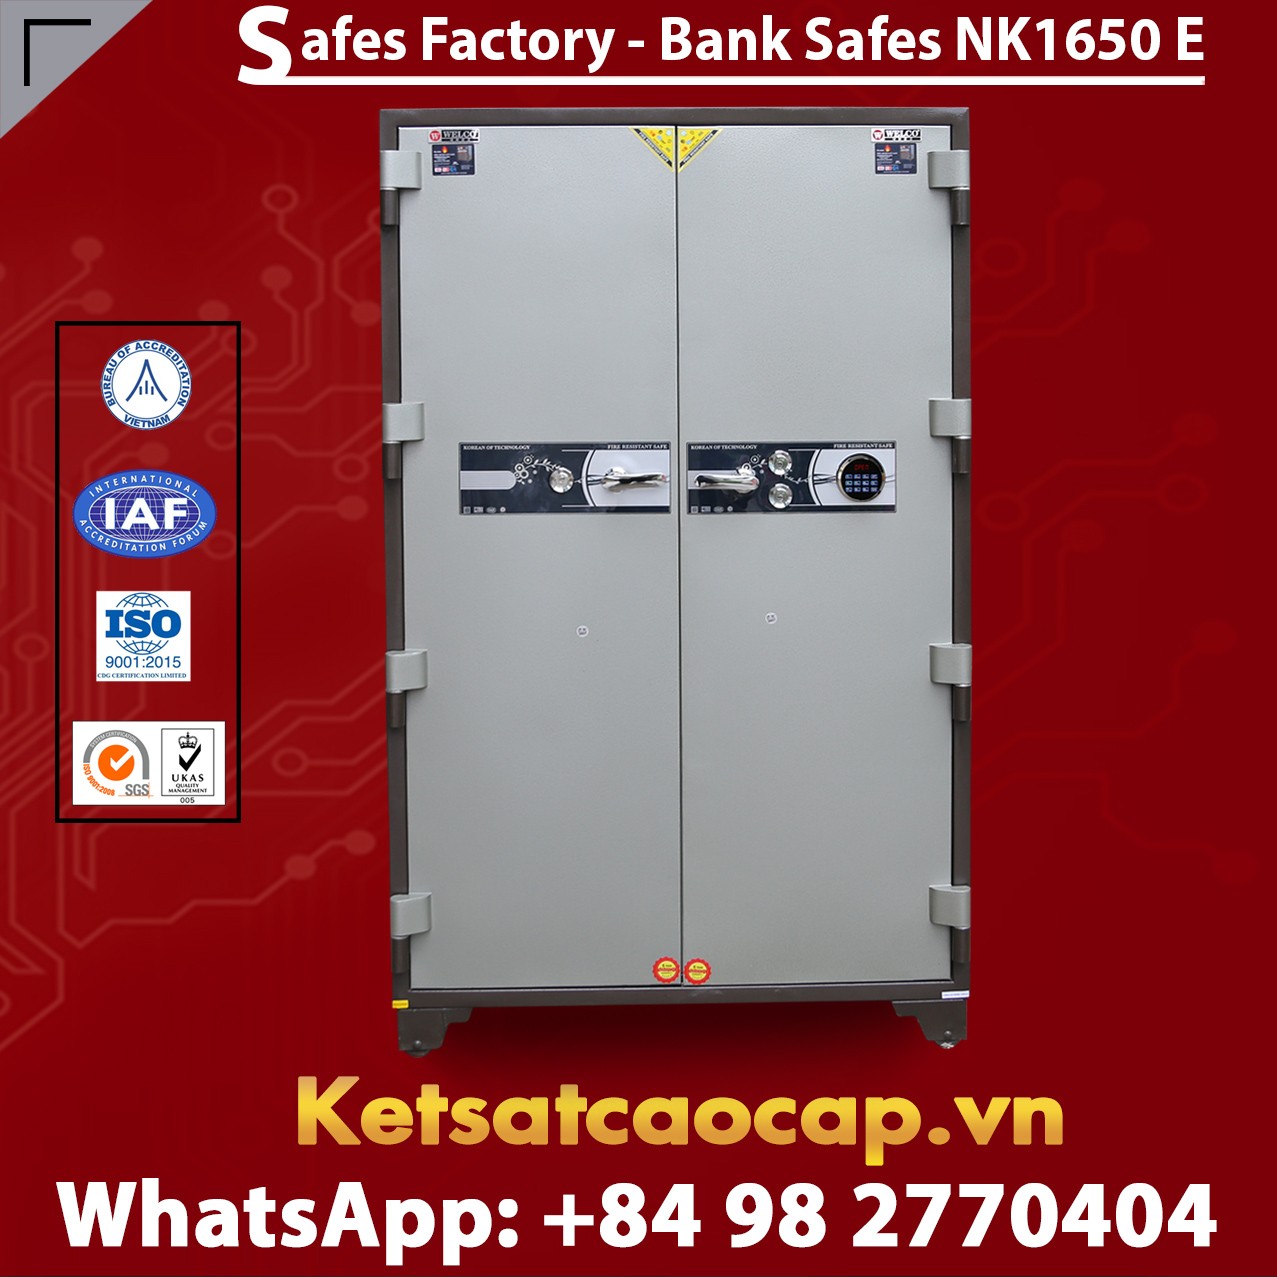 Bank Safe NK 1650 E Two Doors Best Selling Security Large Safe For Bank